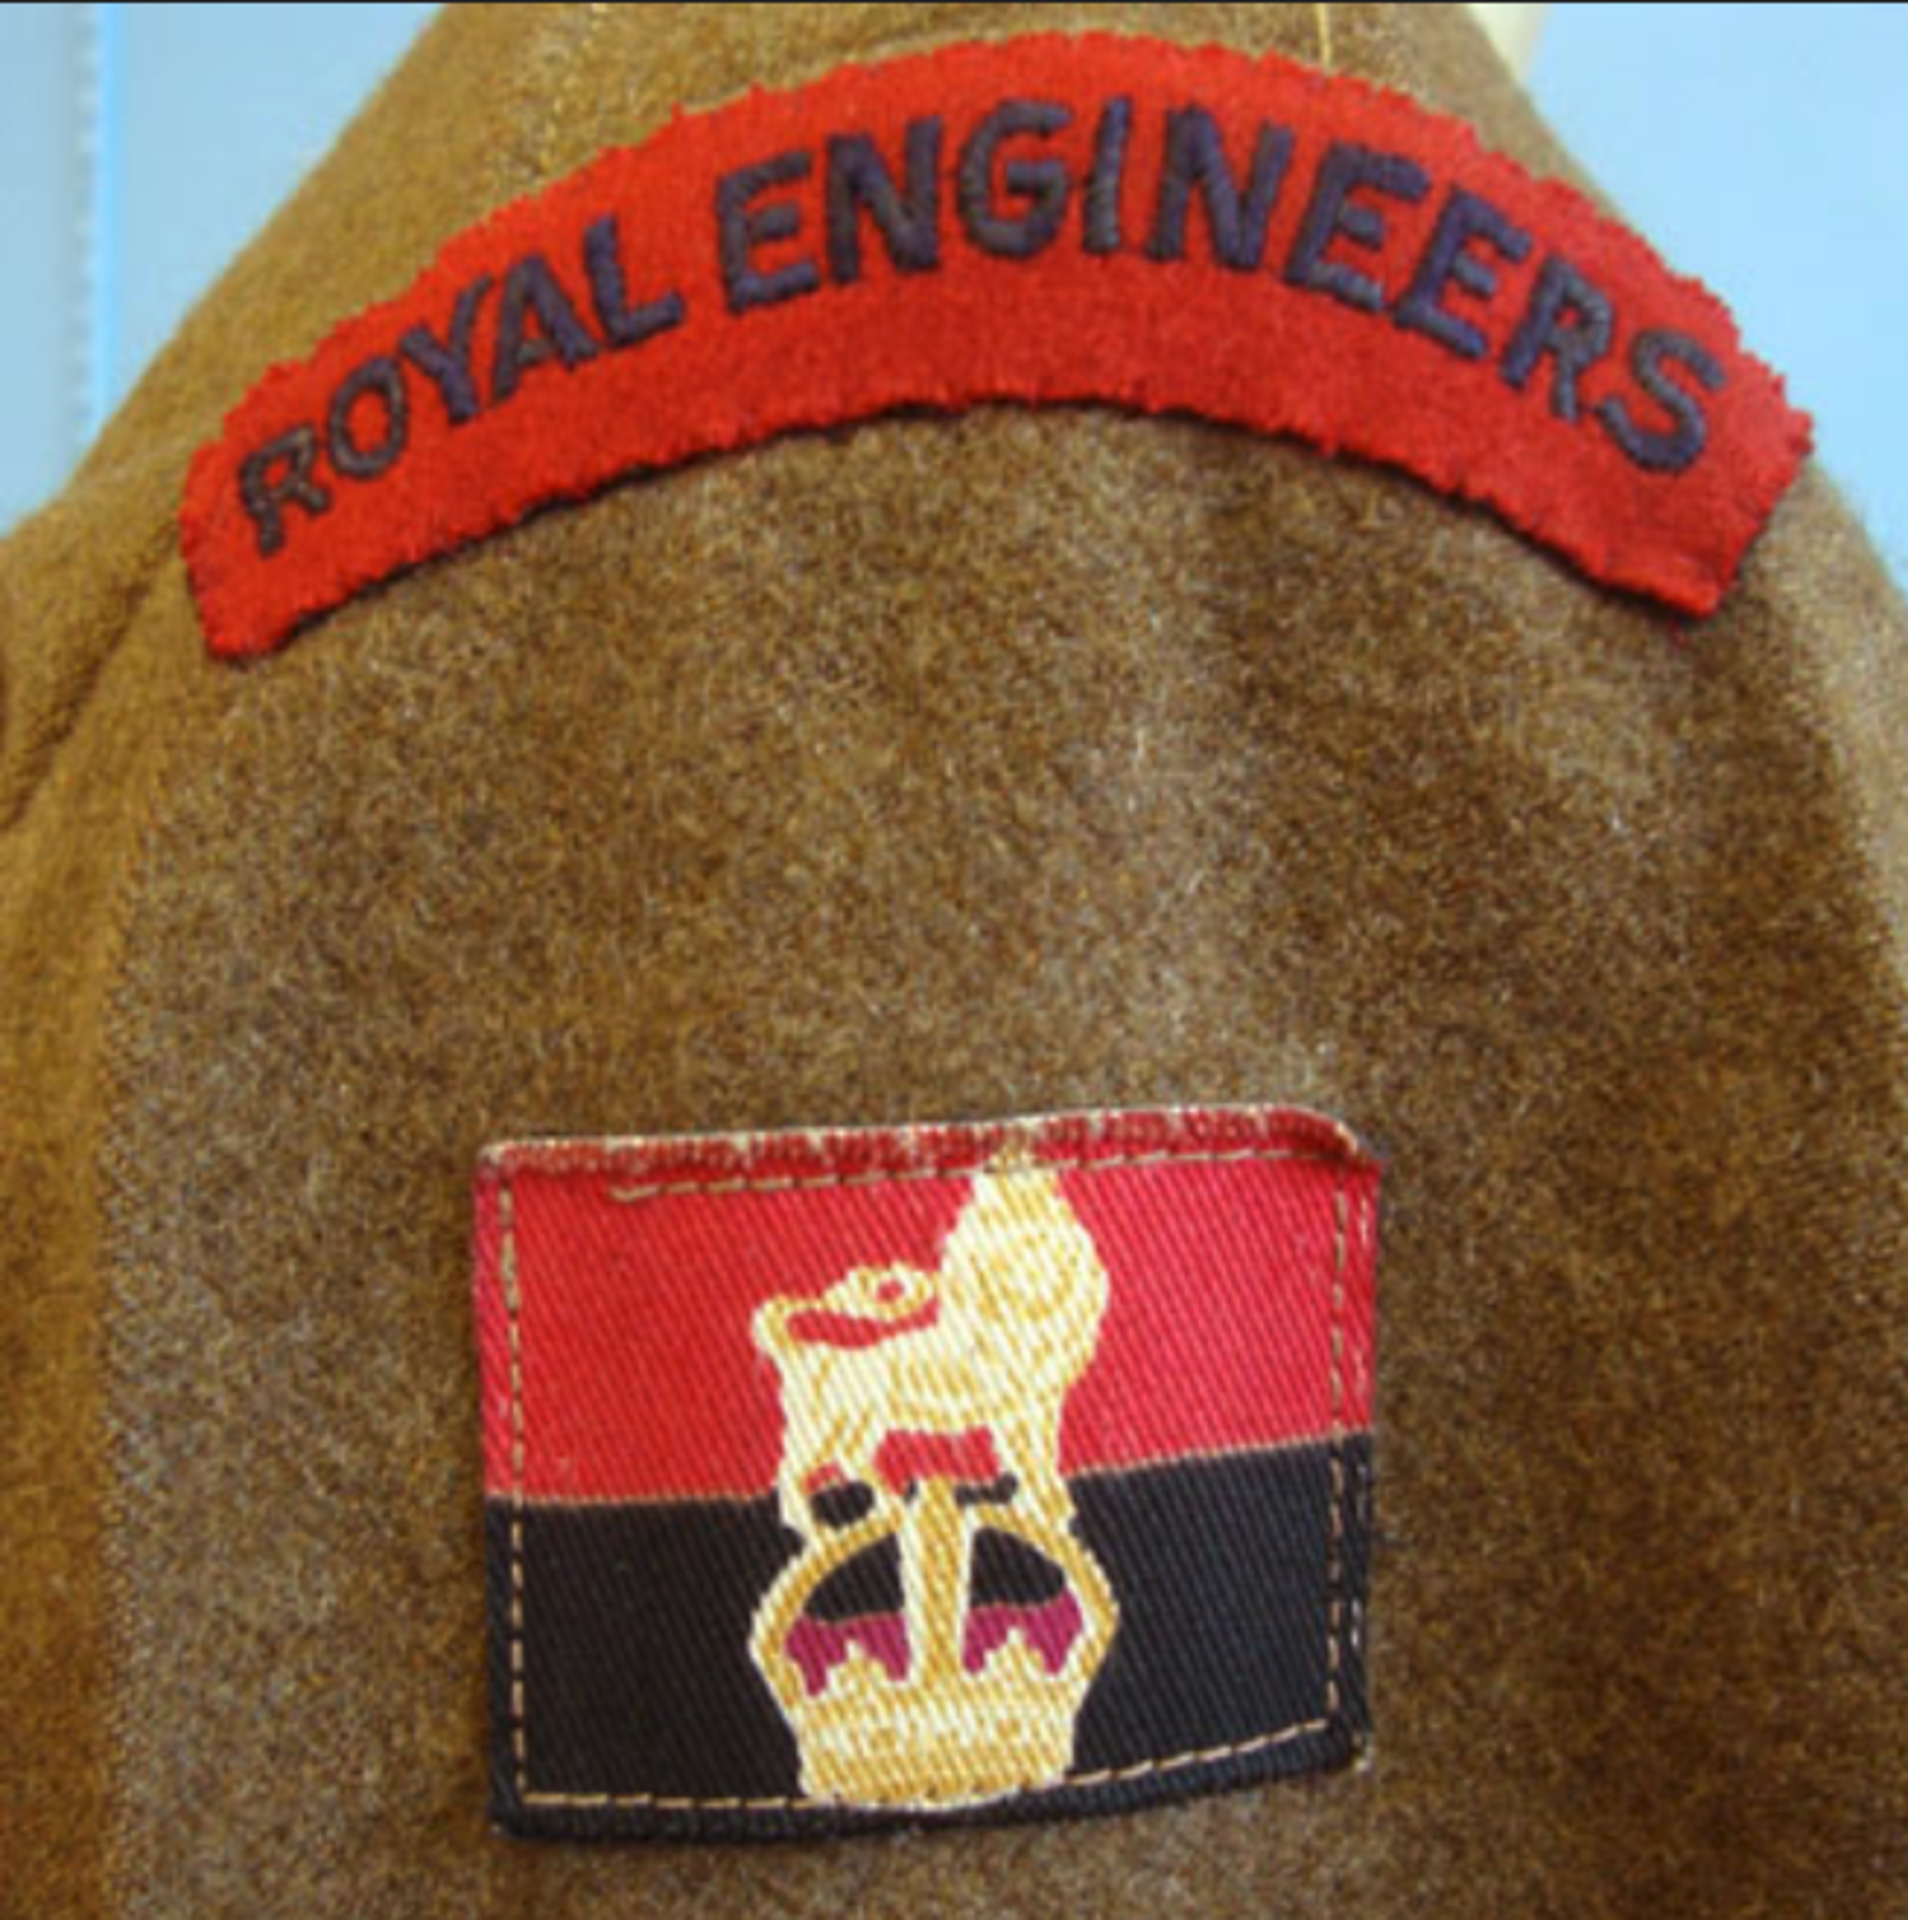 1949 Pattern British Royal Engineers Battledress to pte 22429557 - Image 2 of 3